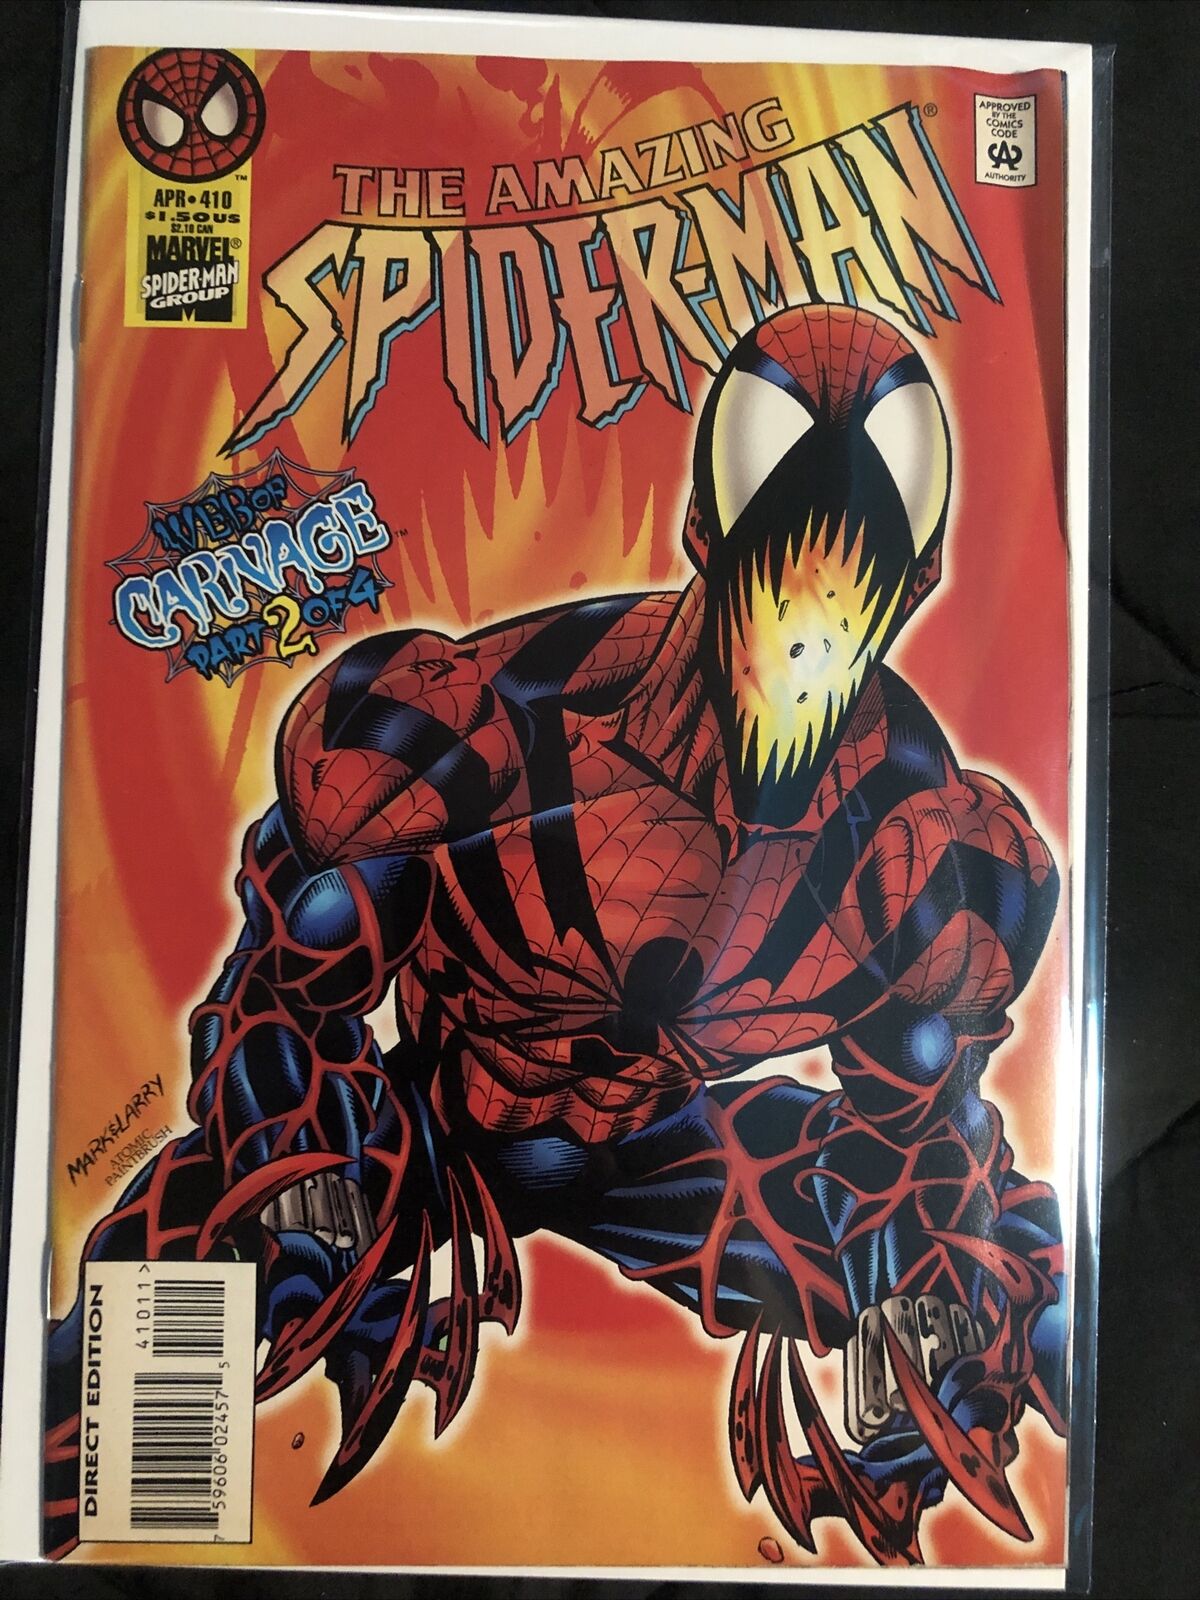 The Amazing Spider-Man #410 - 1st Appearance of Spider-Carnage (1996) Bagged Boa